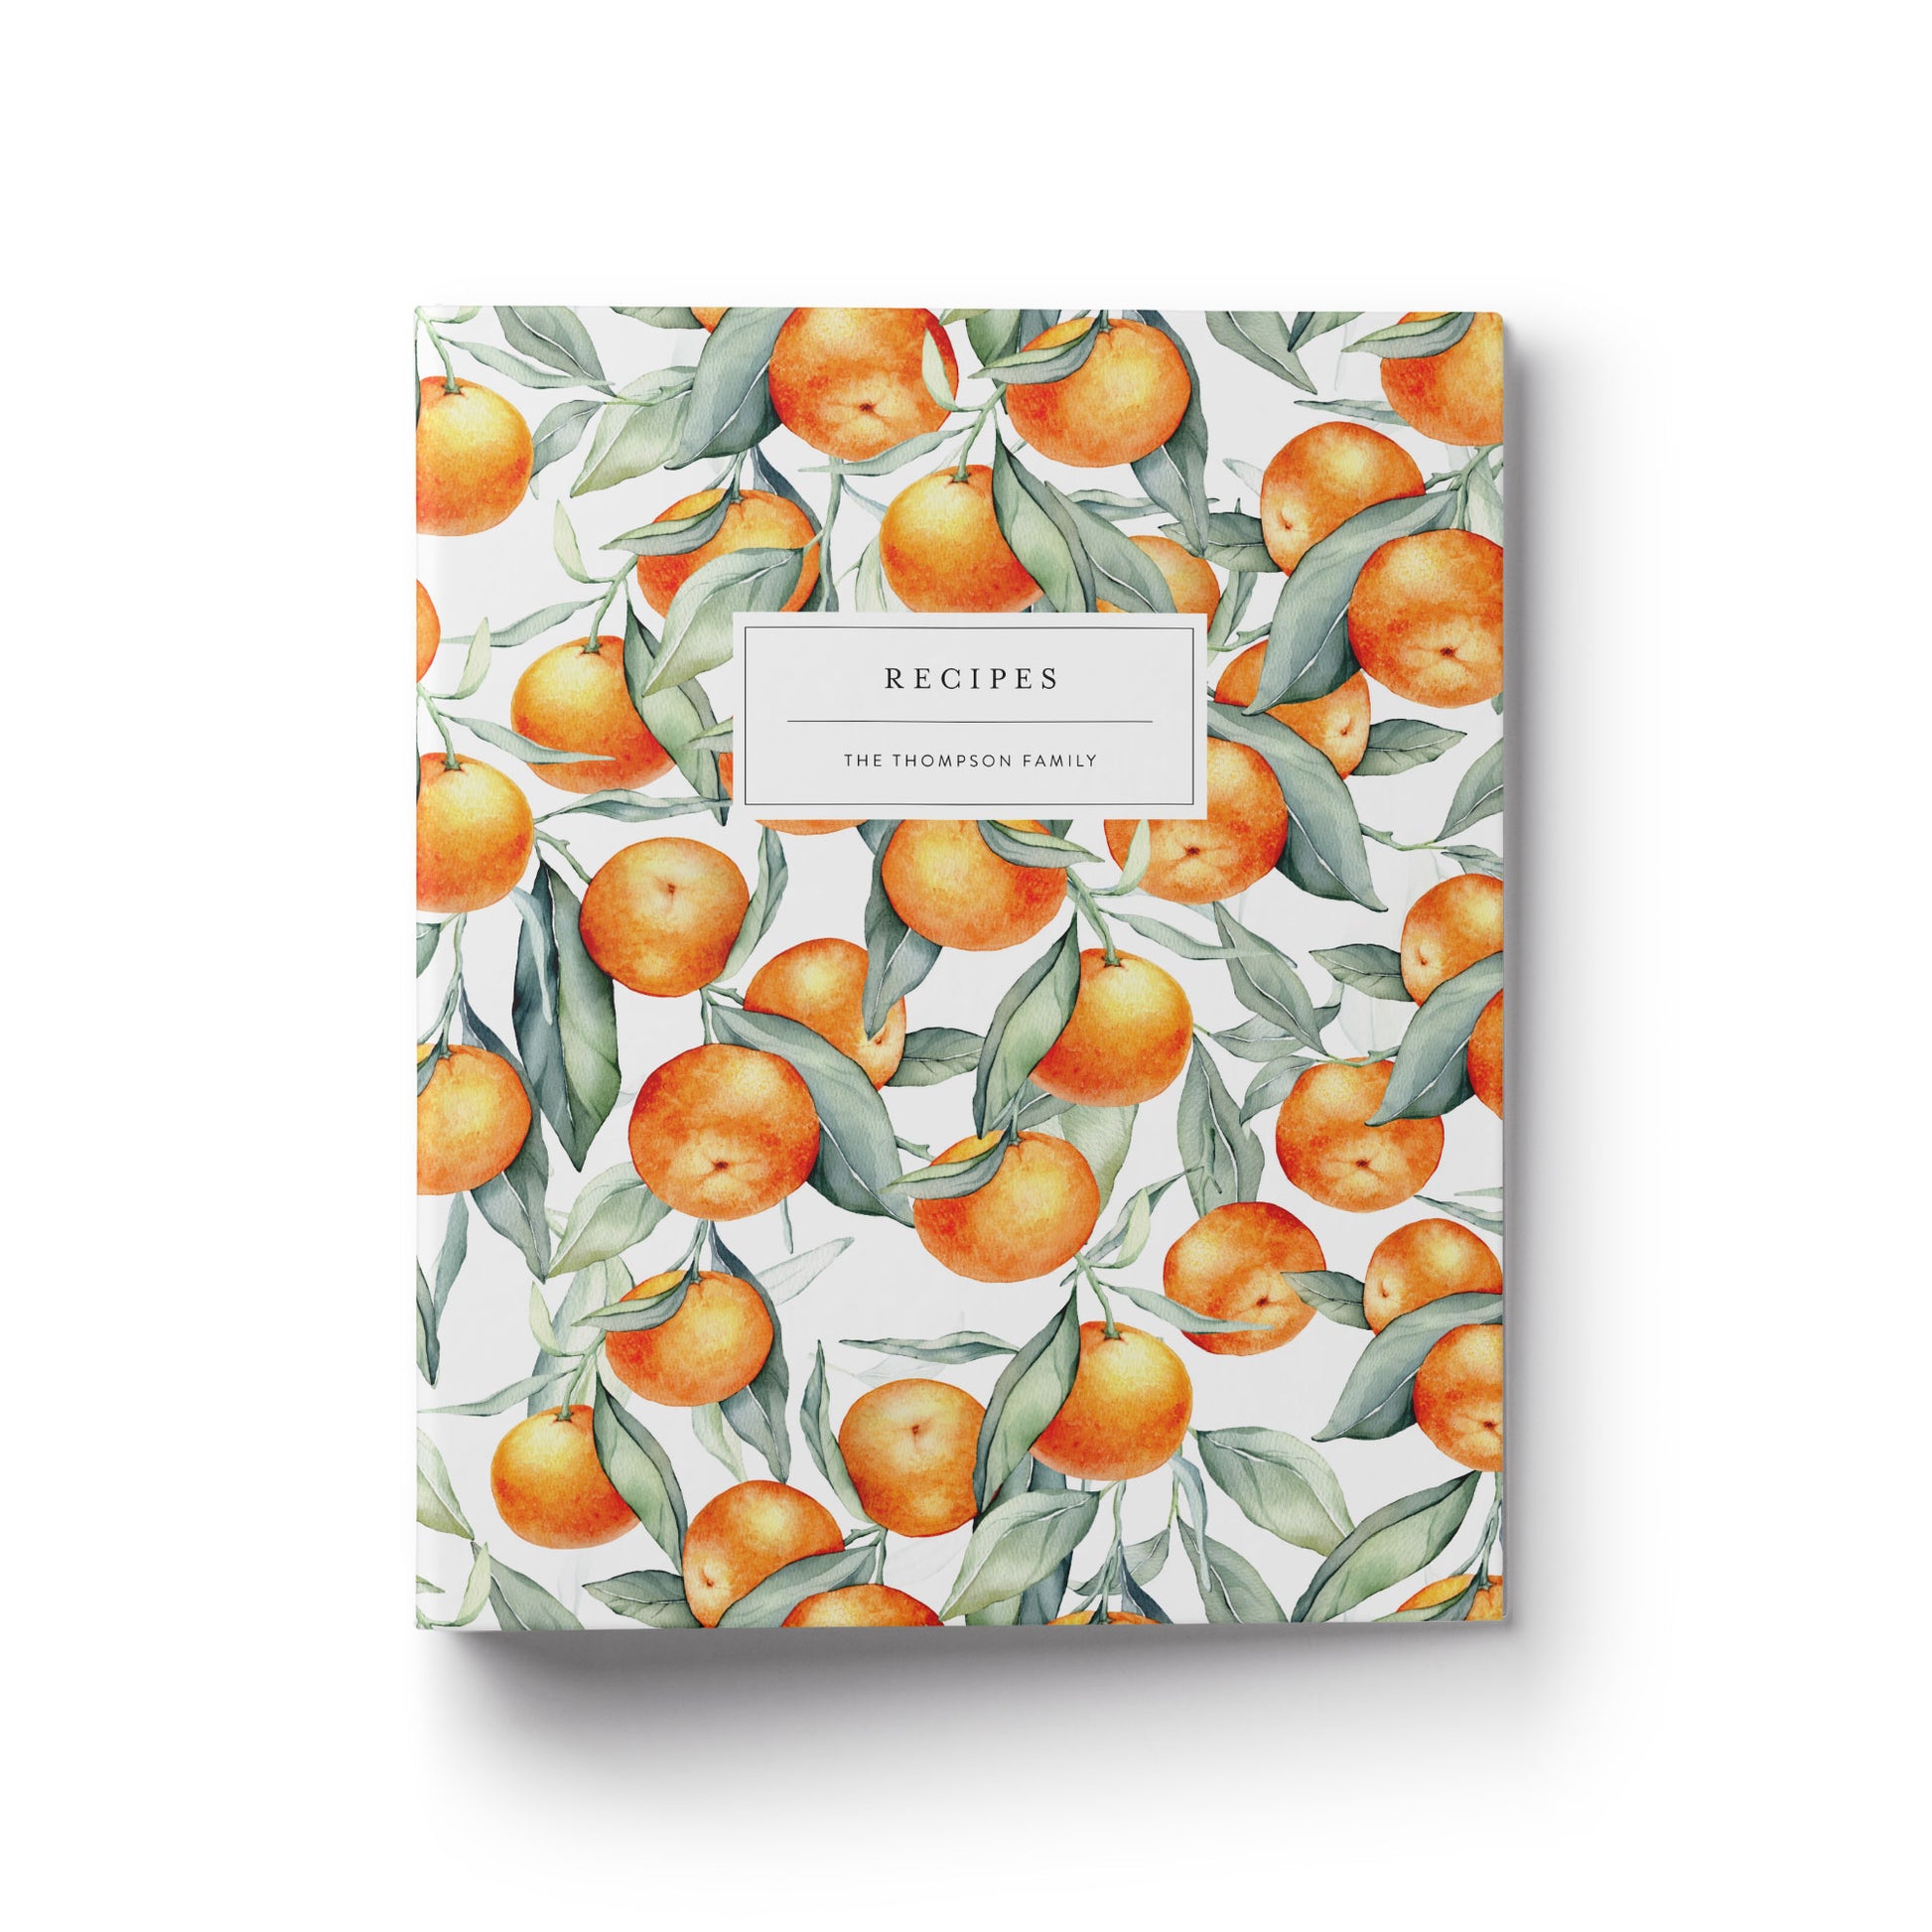 A citrus orange grove custom recipe binder makes the perfect gift for any occasion